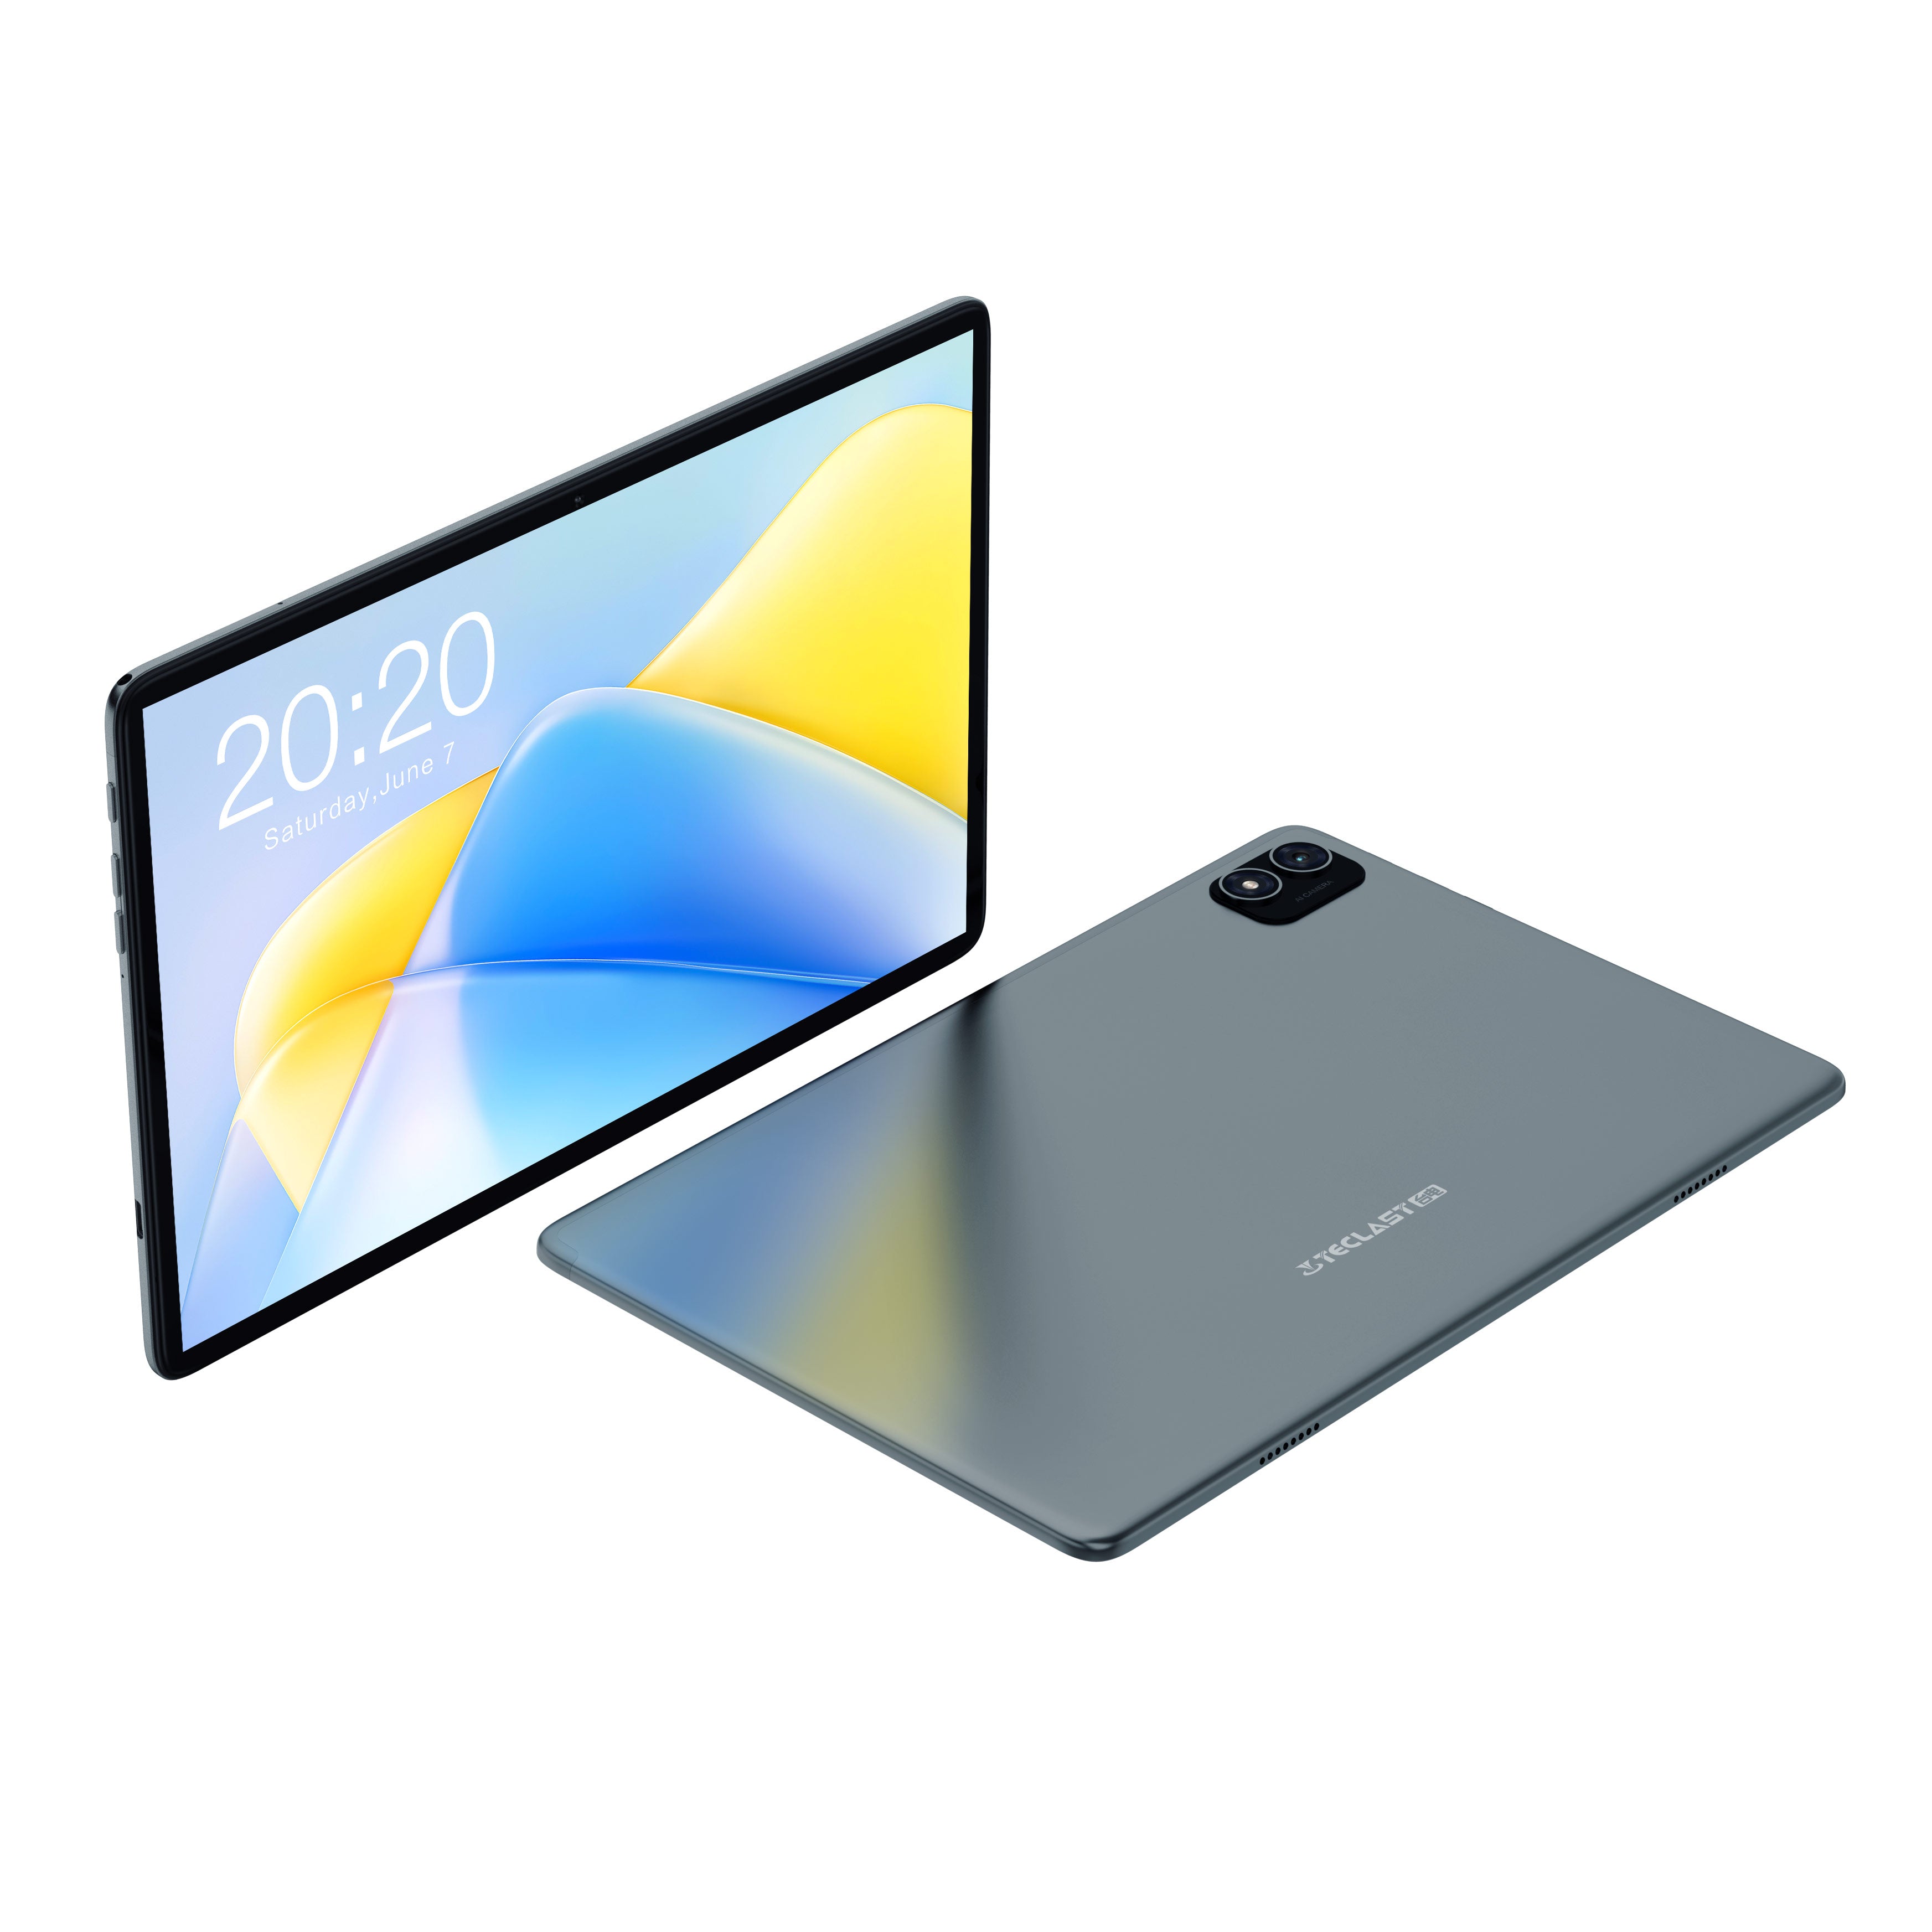 Teclast T60 Price Specs And Release Date - MobileDaddy